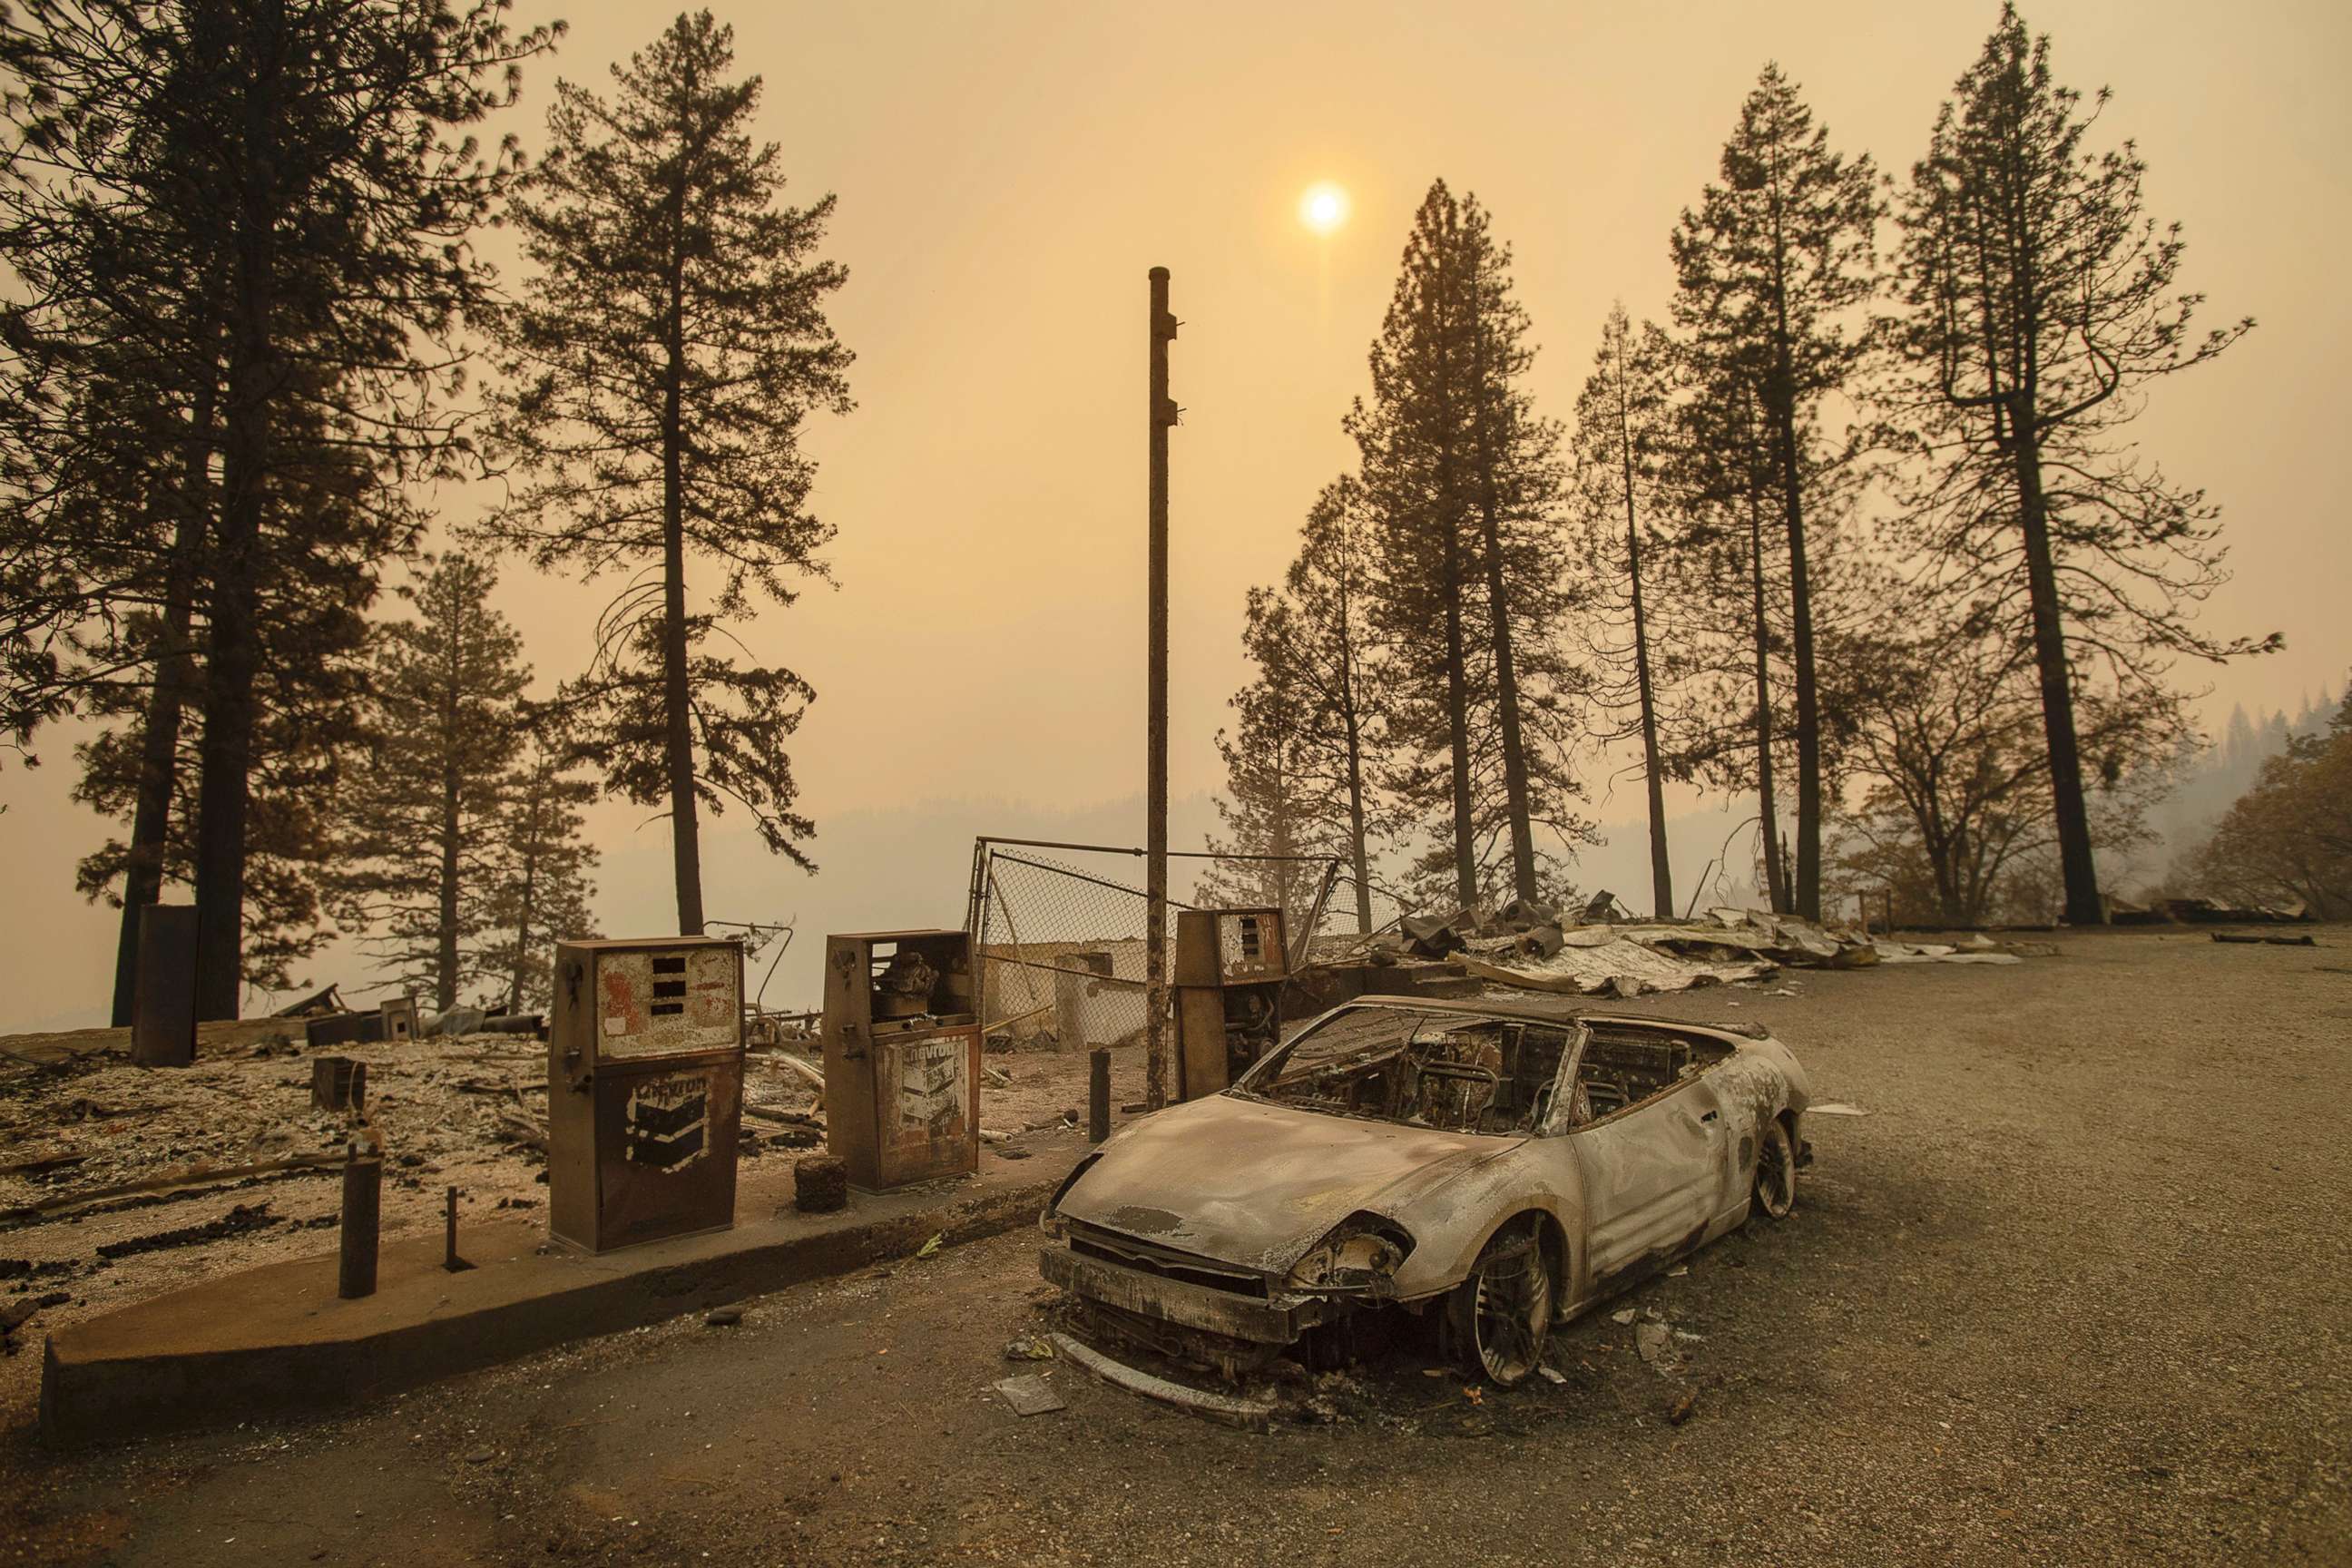 PHOTO: As the Camp Fire burns nearby, a scorched car rests by gas pumps near Pulga, Calif., Nov. 11, 2018.